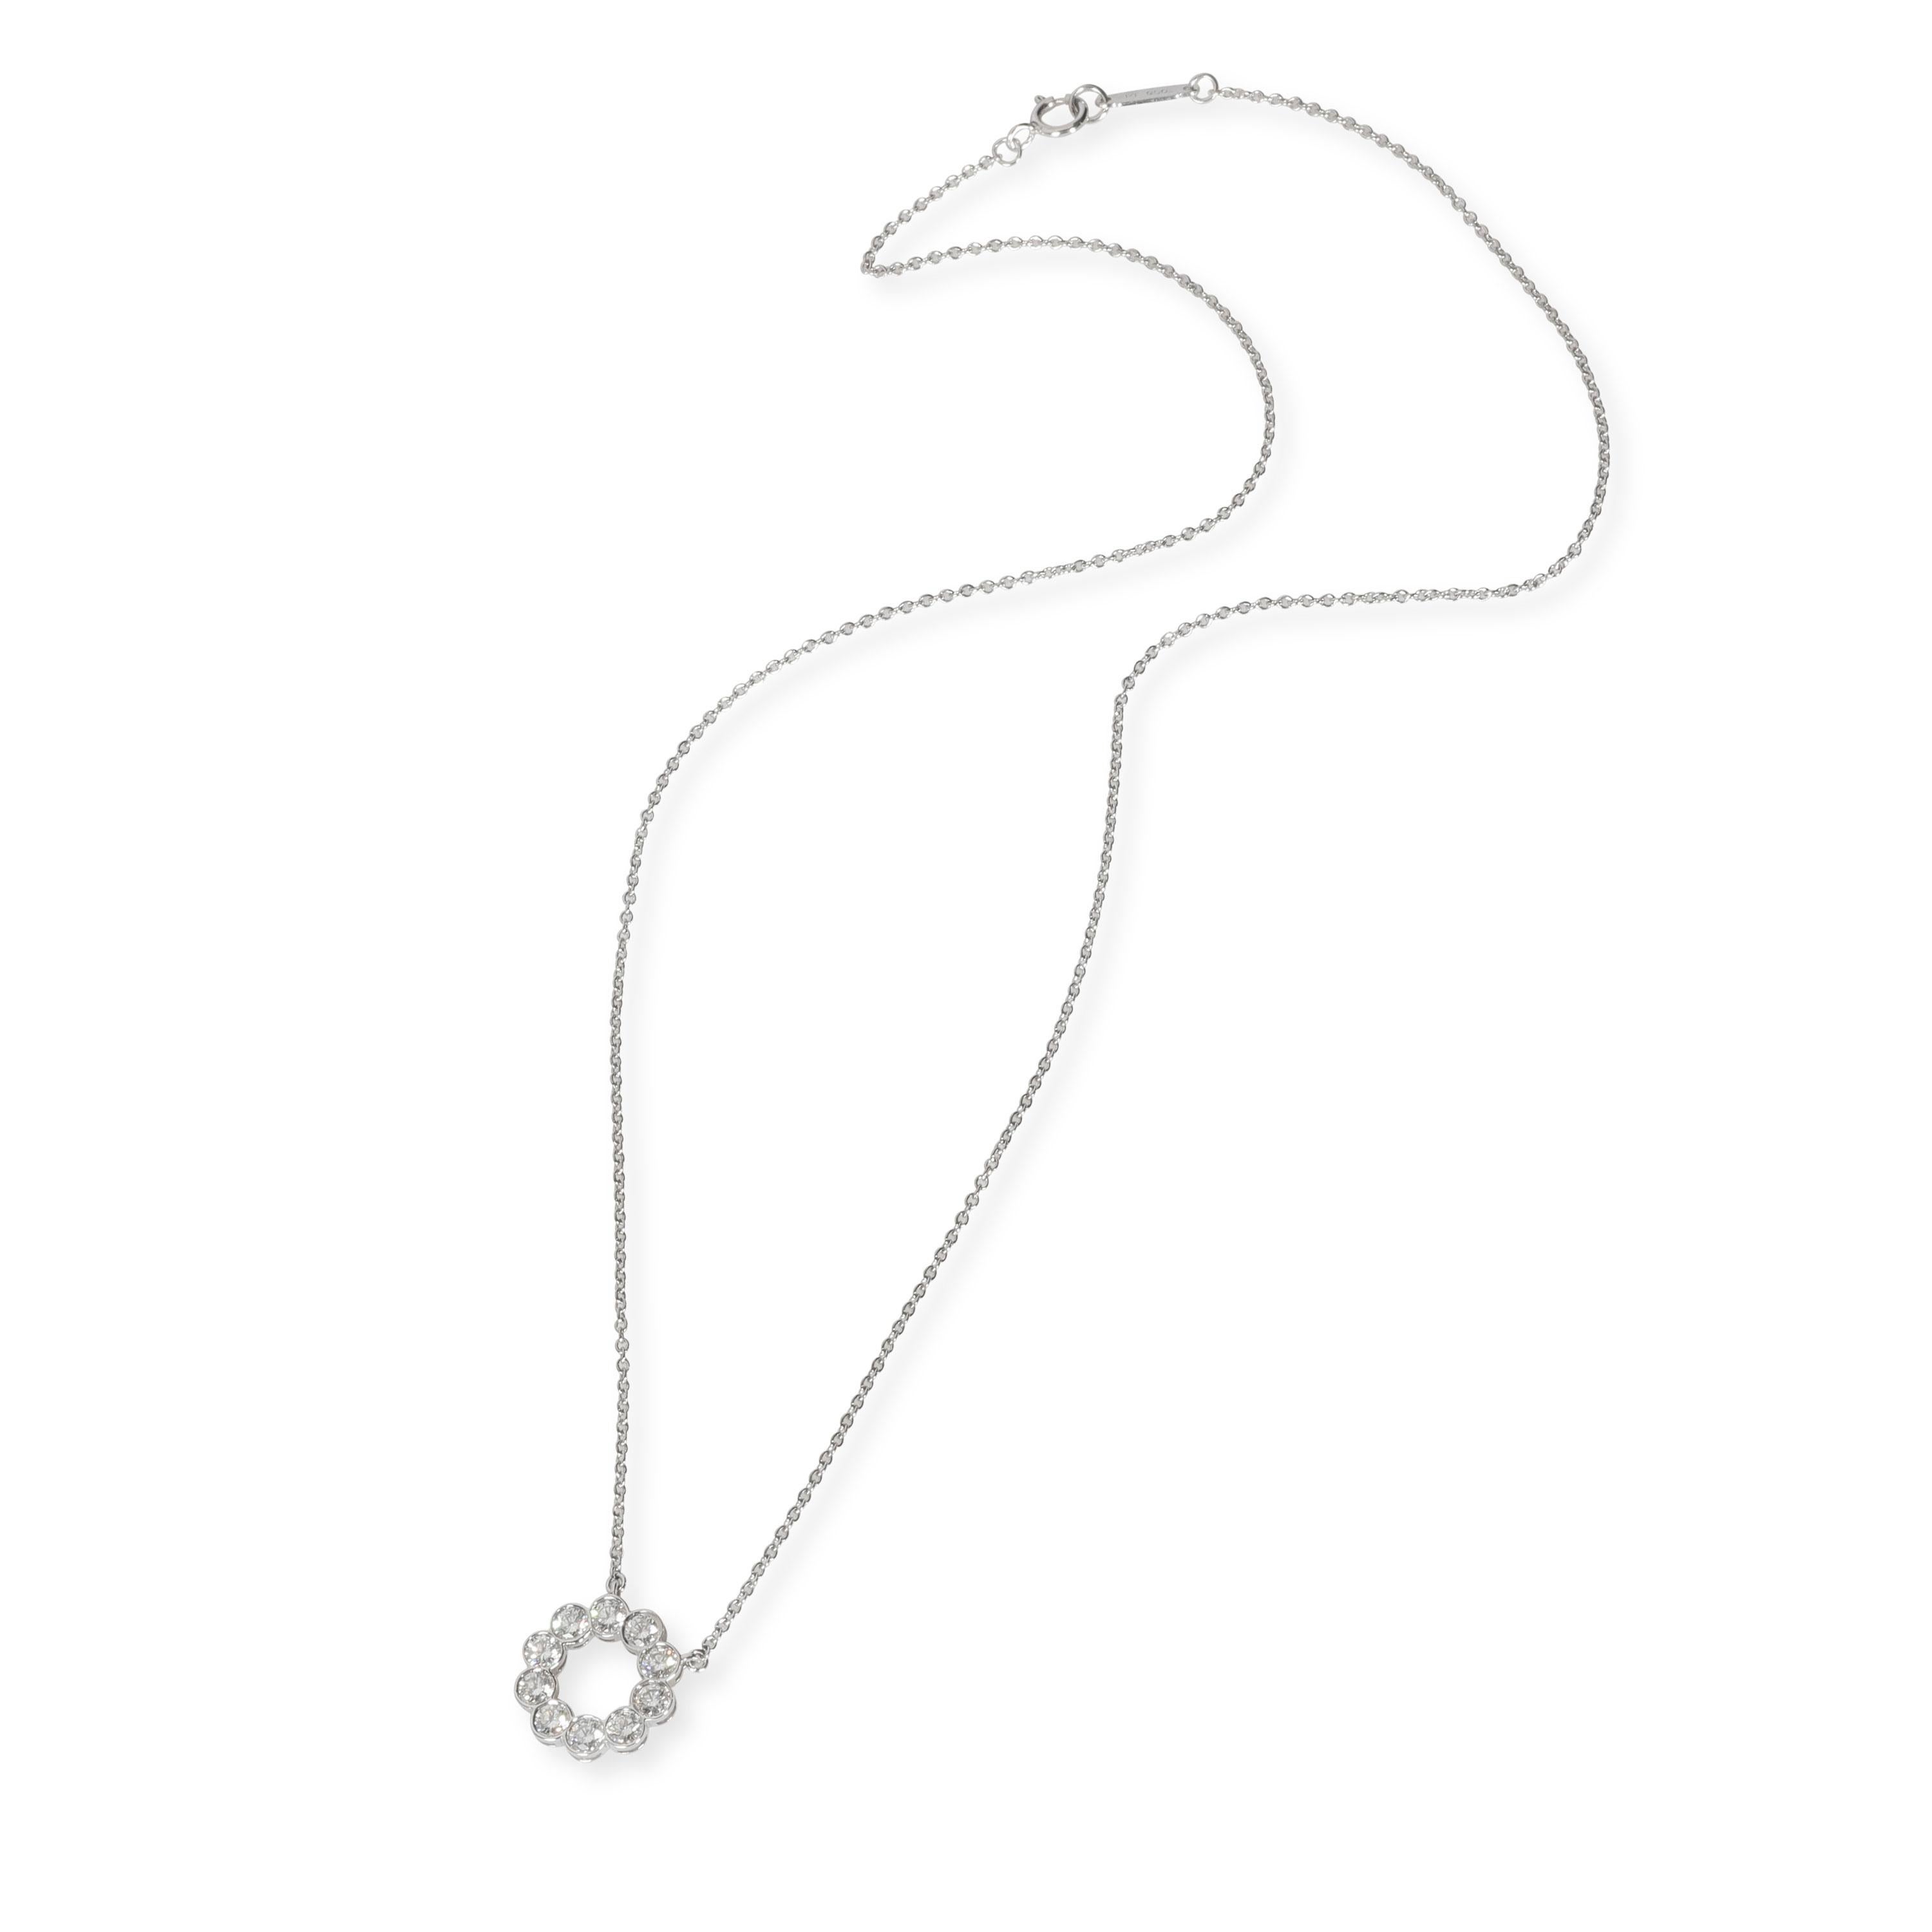 Tiffany & Co. Jazz Circle Diamond Necklace in Platinum 0.90 CTW

PRIMARY DETAILS
SKU: 107528
Listing Title: Tiffany & Co. Jazz Circle Diamond Necklace in Platinum 0.90 CTW
Condition Description: Retails for 6,500 USD. In excellent condition and